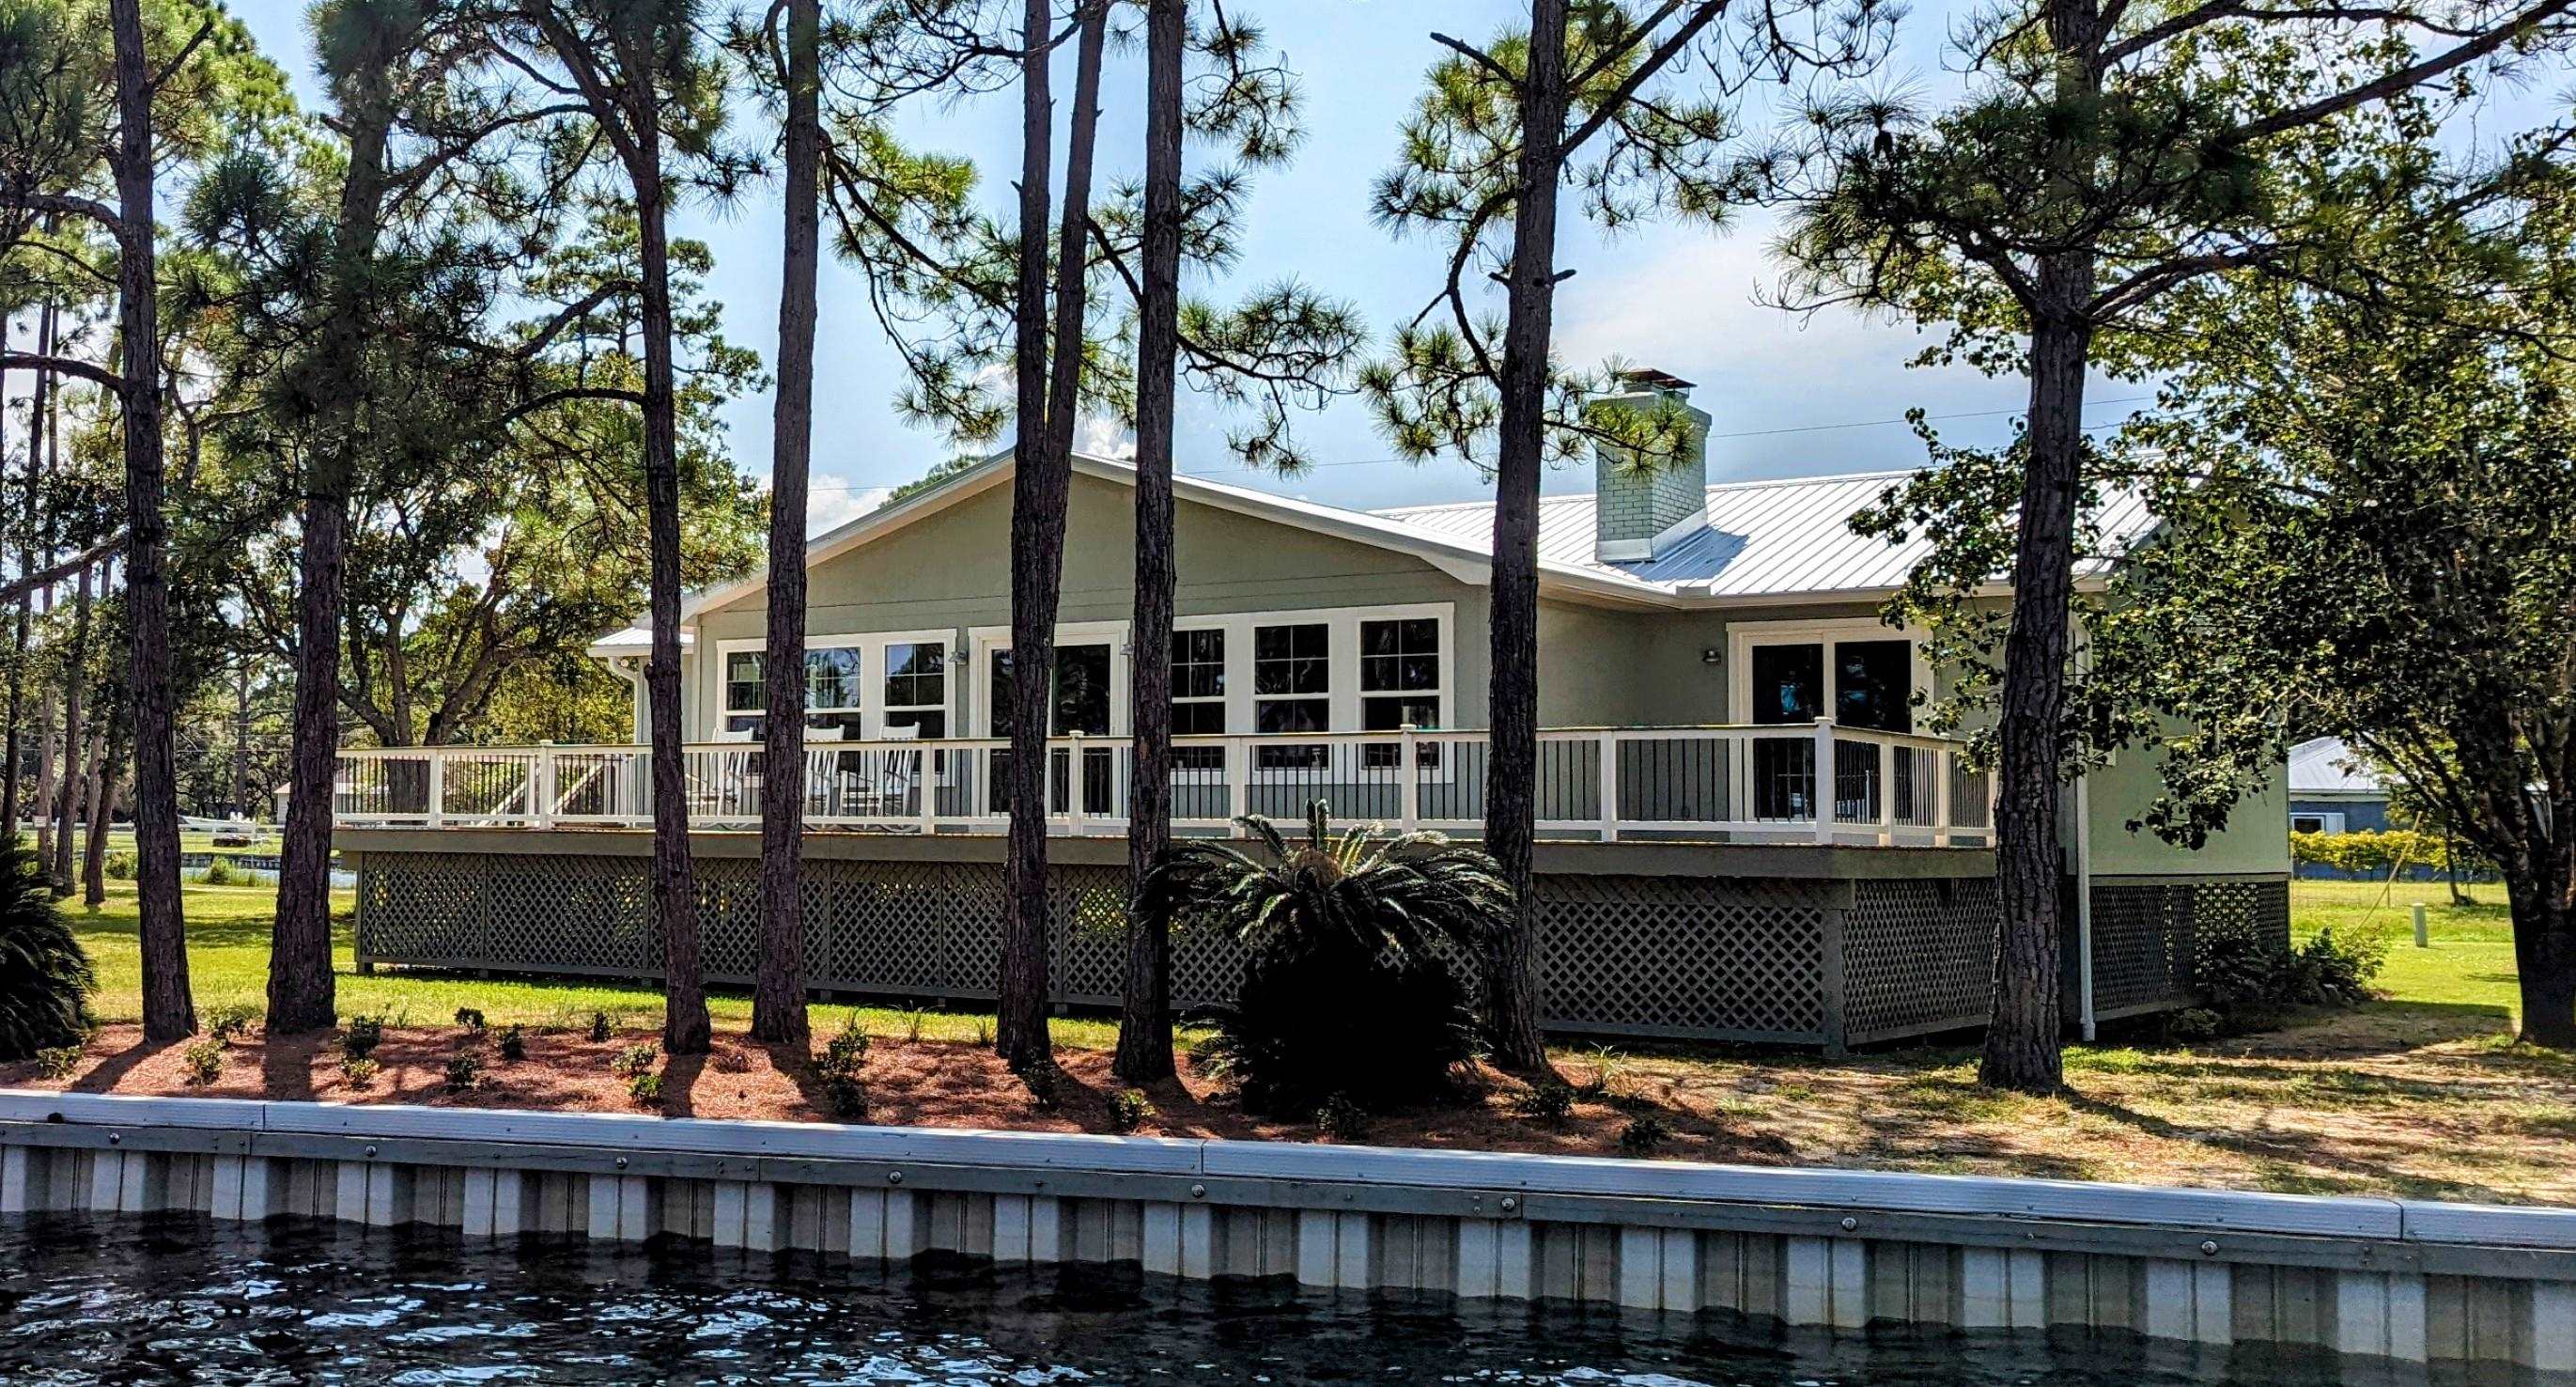 Beautiful Home on tidal canal. New 60 foot deck with views of the river. This home has been beautifully renovated.  Lots of room to entertain. Kitchen has an island with seating for 6 a beverage refrigerator and tons of cabinets.   Large main bedroom with fireplace and spa-like bathroom and walk in closet.   Pantry and laundry room with cabinets. Wood floors and tile throughout.  New roof, windows, appliances, Air conditioner, water heater. This home sits on two lots with a new 150 foot seawall.  Too many features to list them all.  Bring your bikes, boats, kayaks, and beach toys.  Lots to do in this area.  Please come by and see this lovely home.